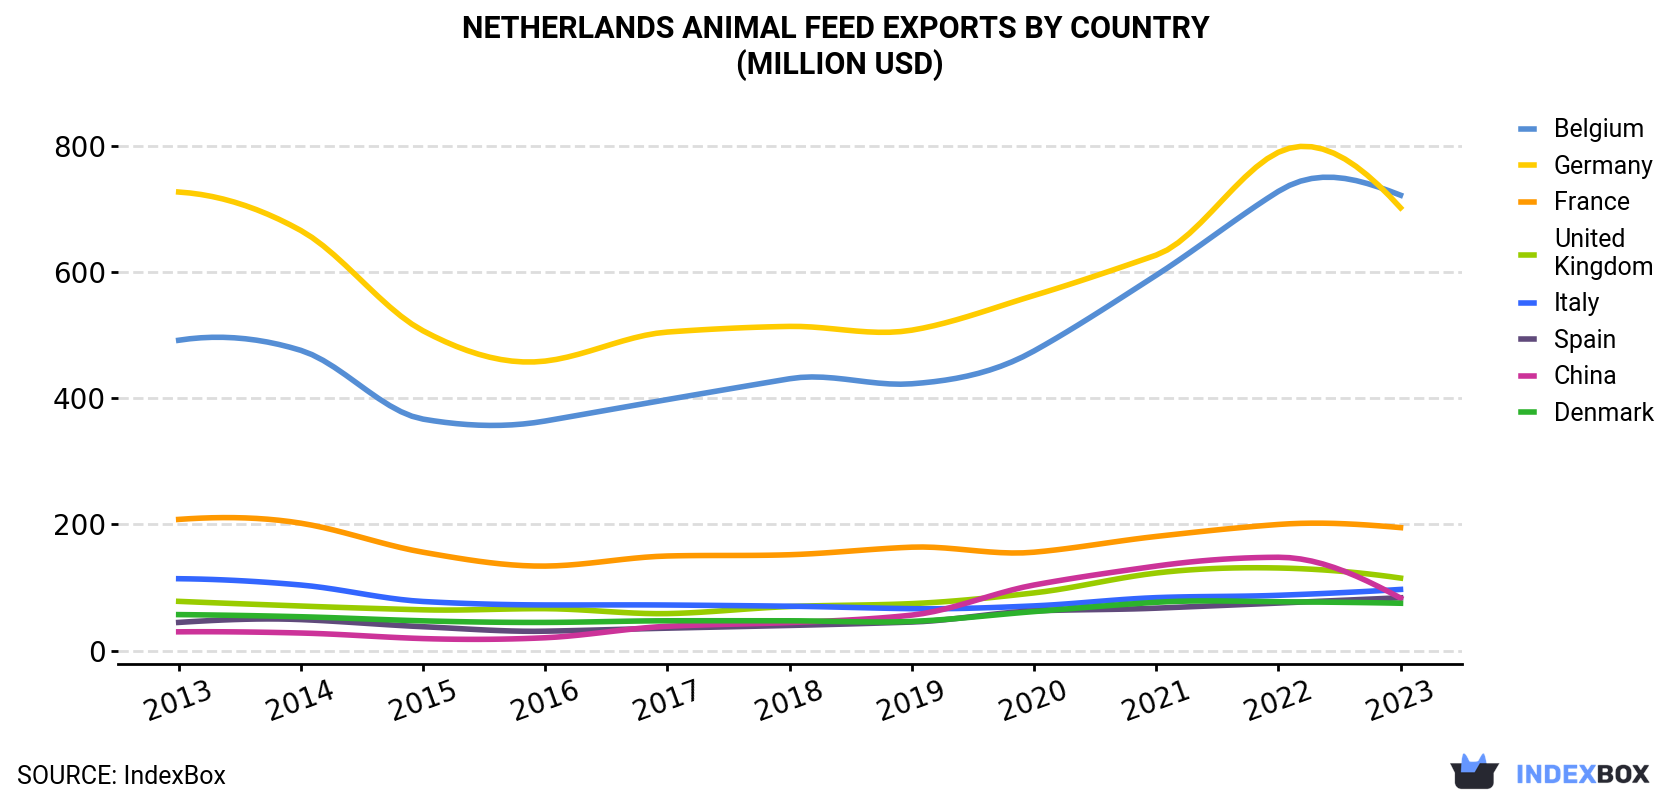 Netherlands Animal Feed Exports By Country (Million USD)